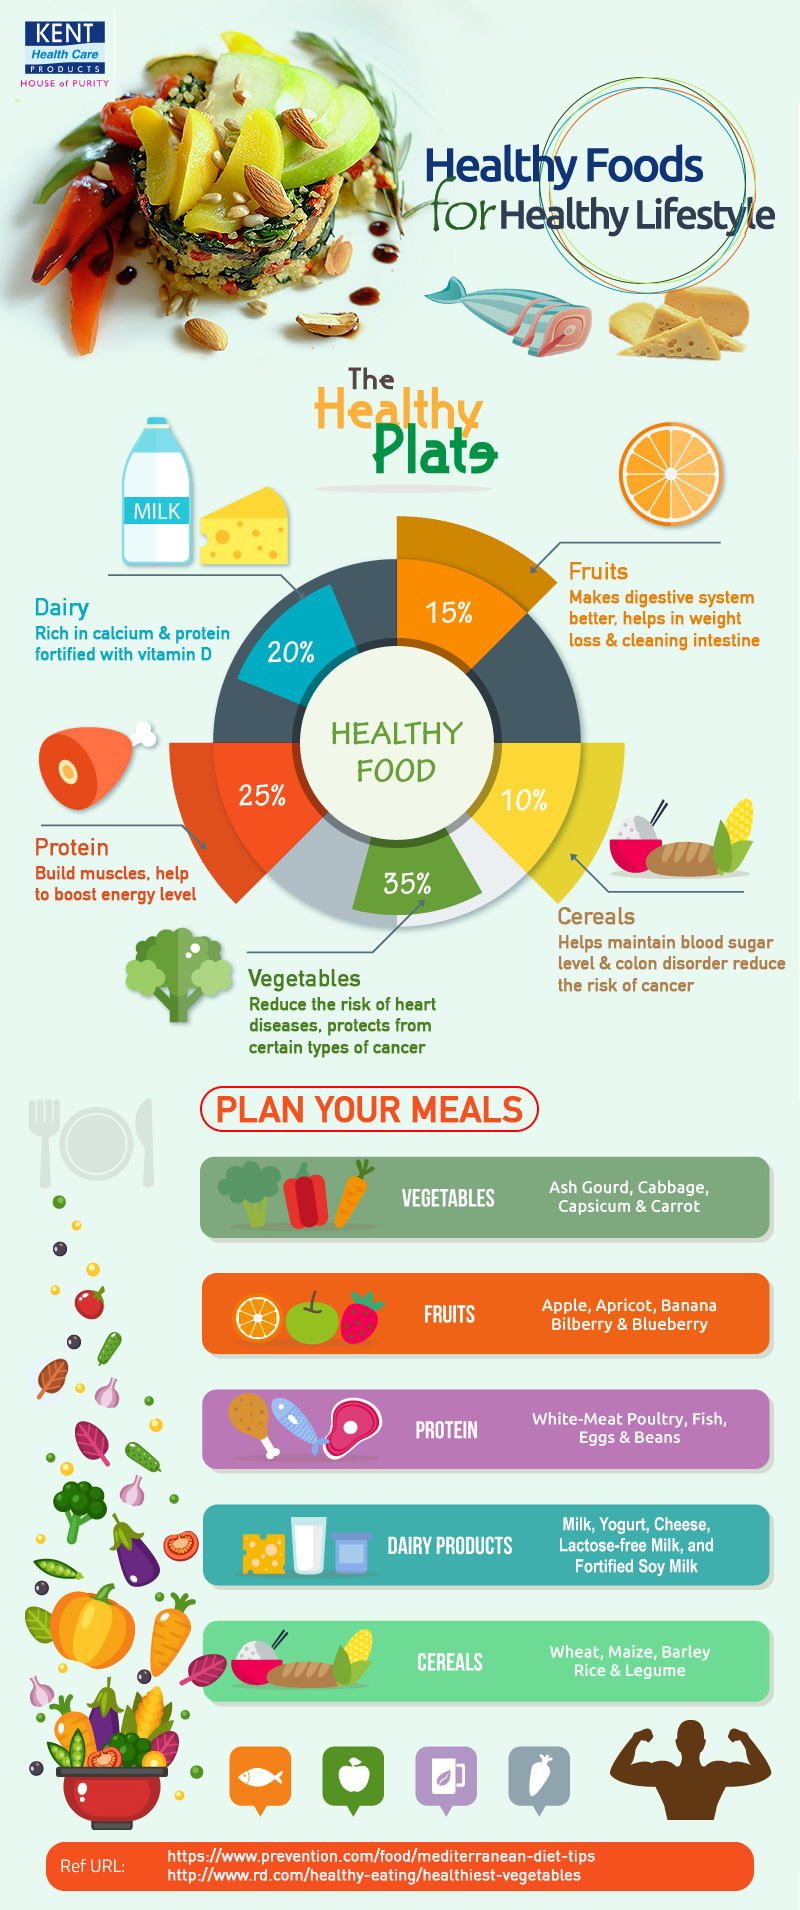 Healthy-Foods-For-Healthy-Lifestyle